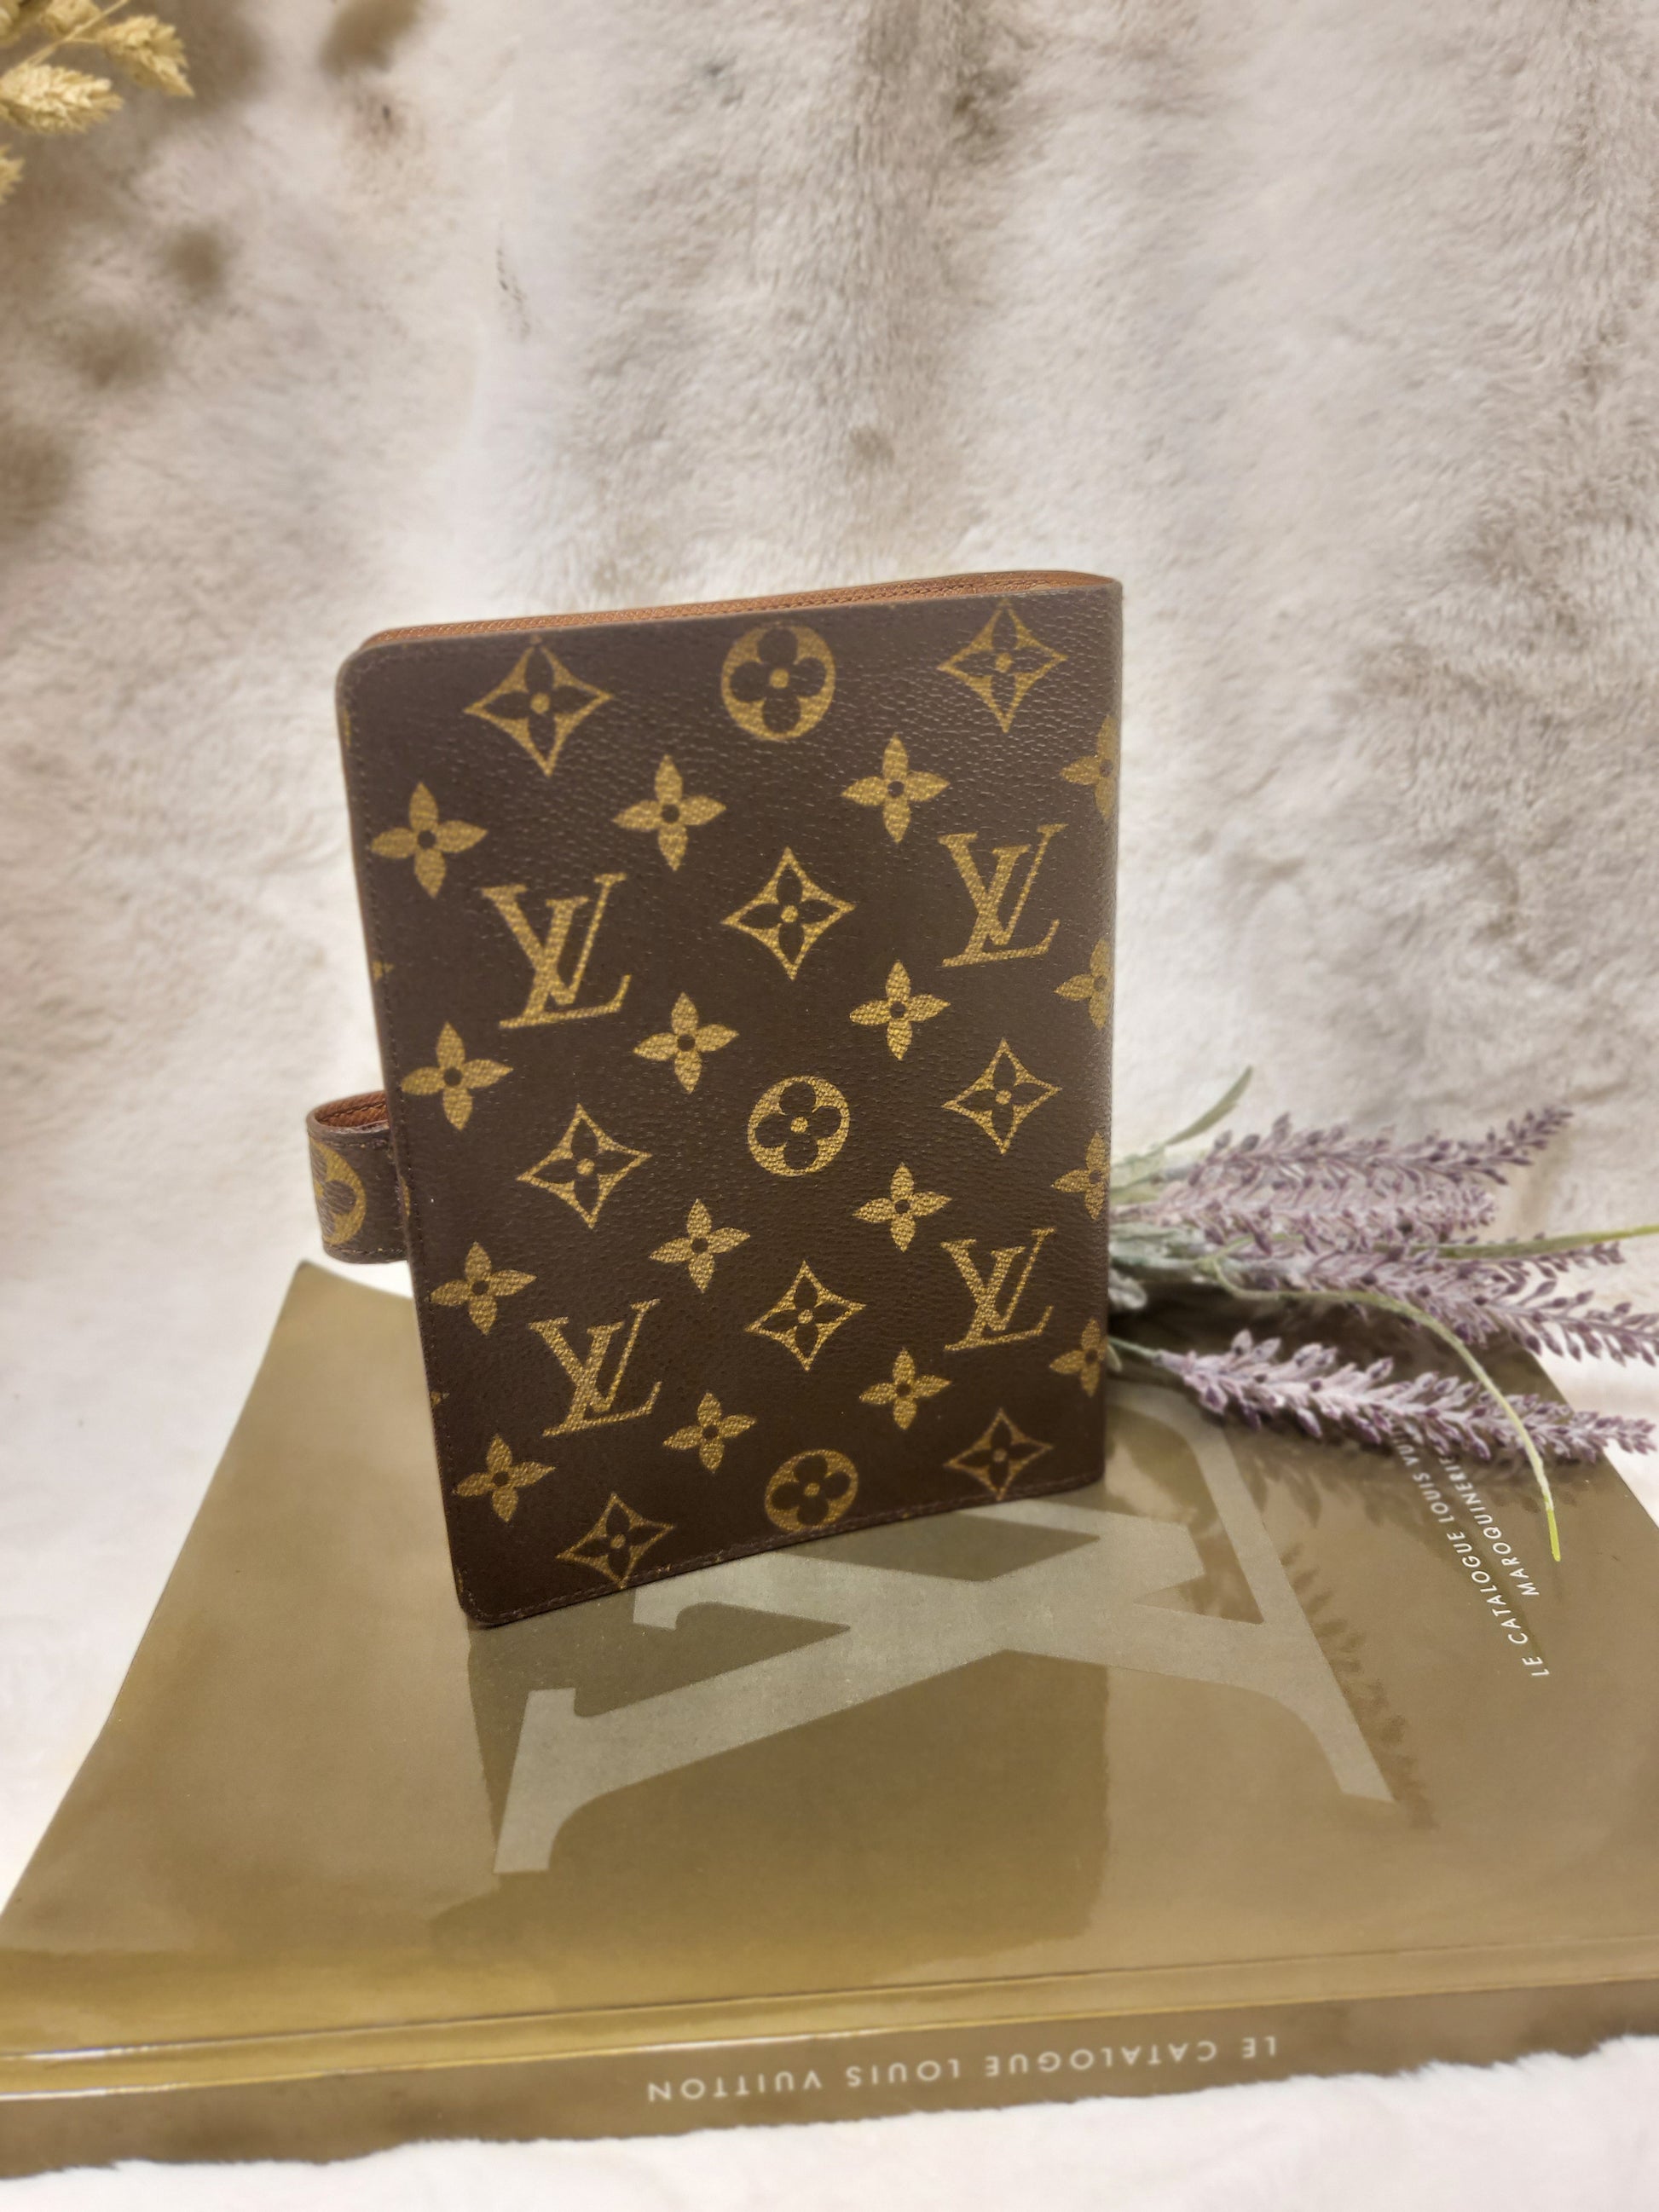 Pre-Owned Louis Vuitton Notebook Cover Agenda PM Brown Monogram